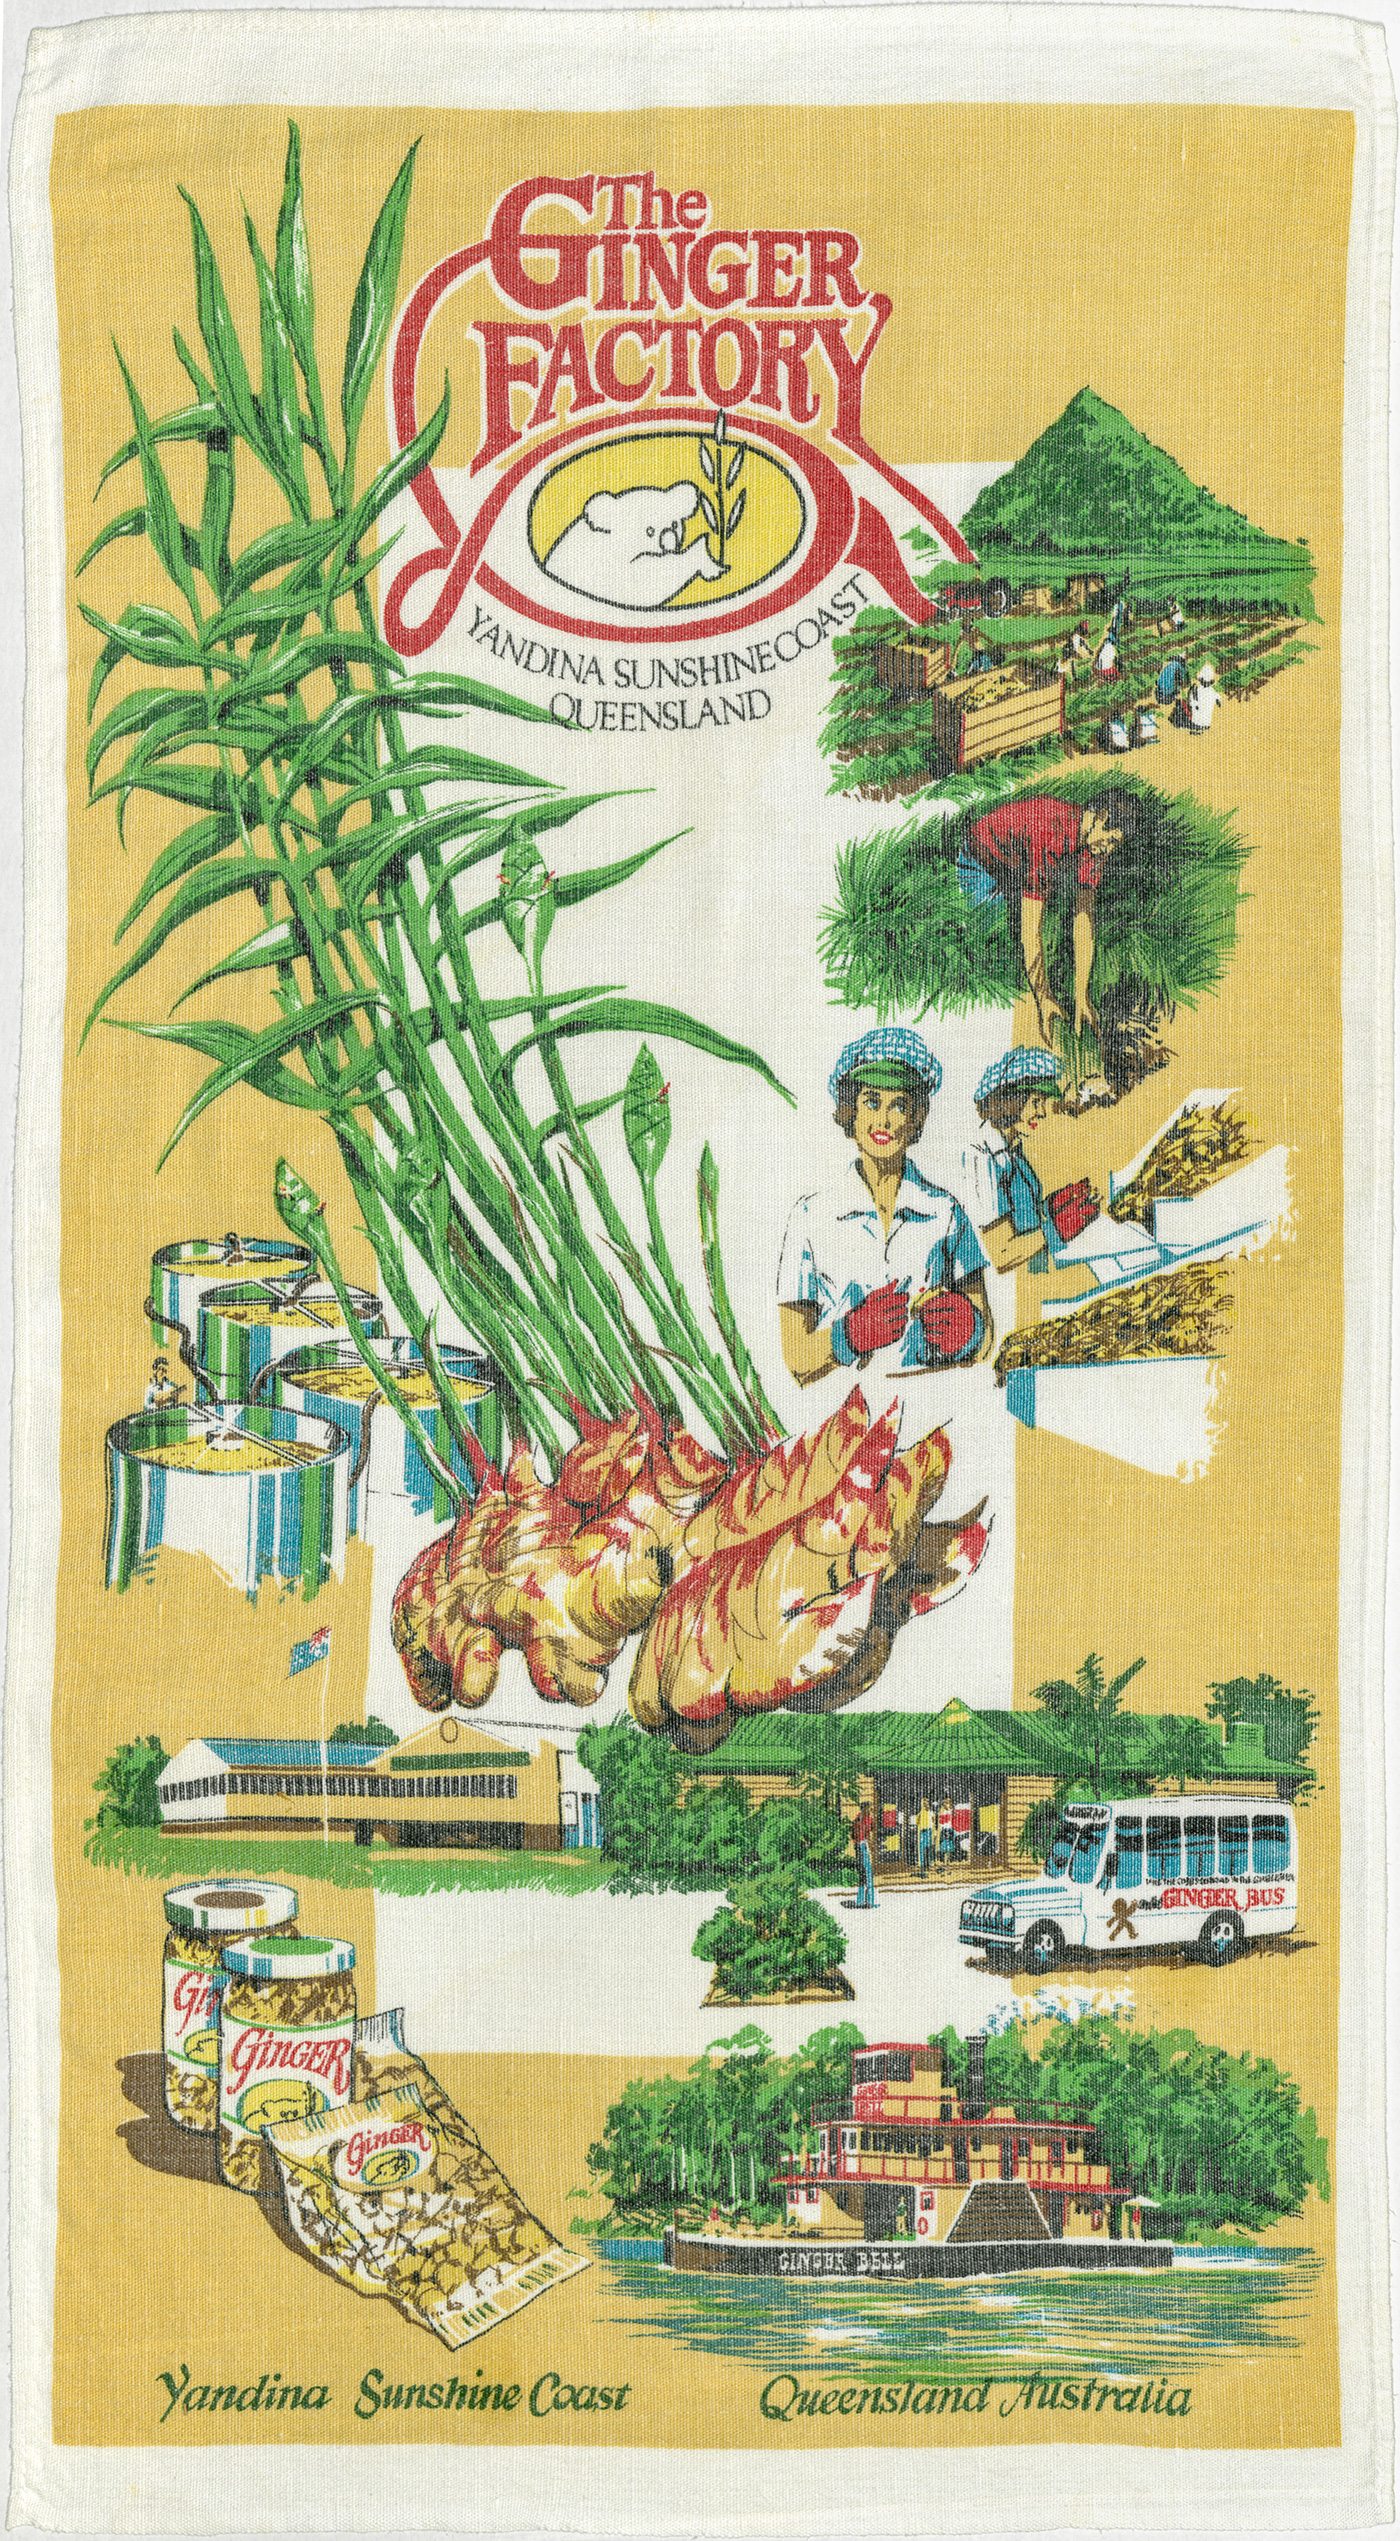 Colourful tea towel of The Ginger Factory